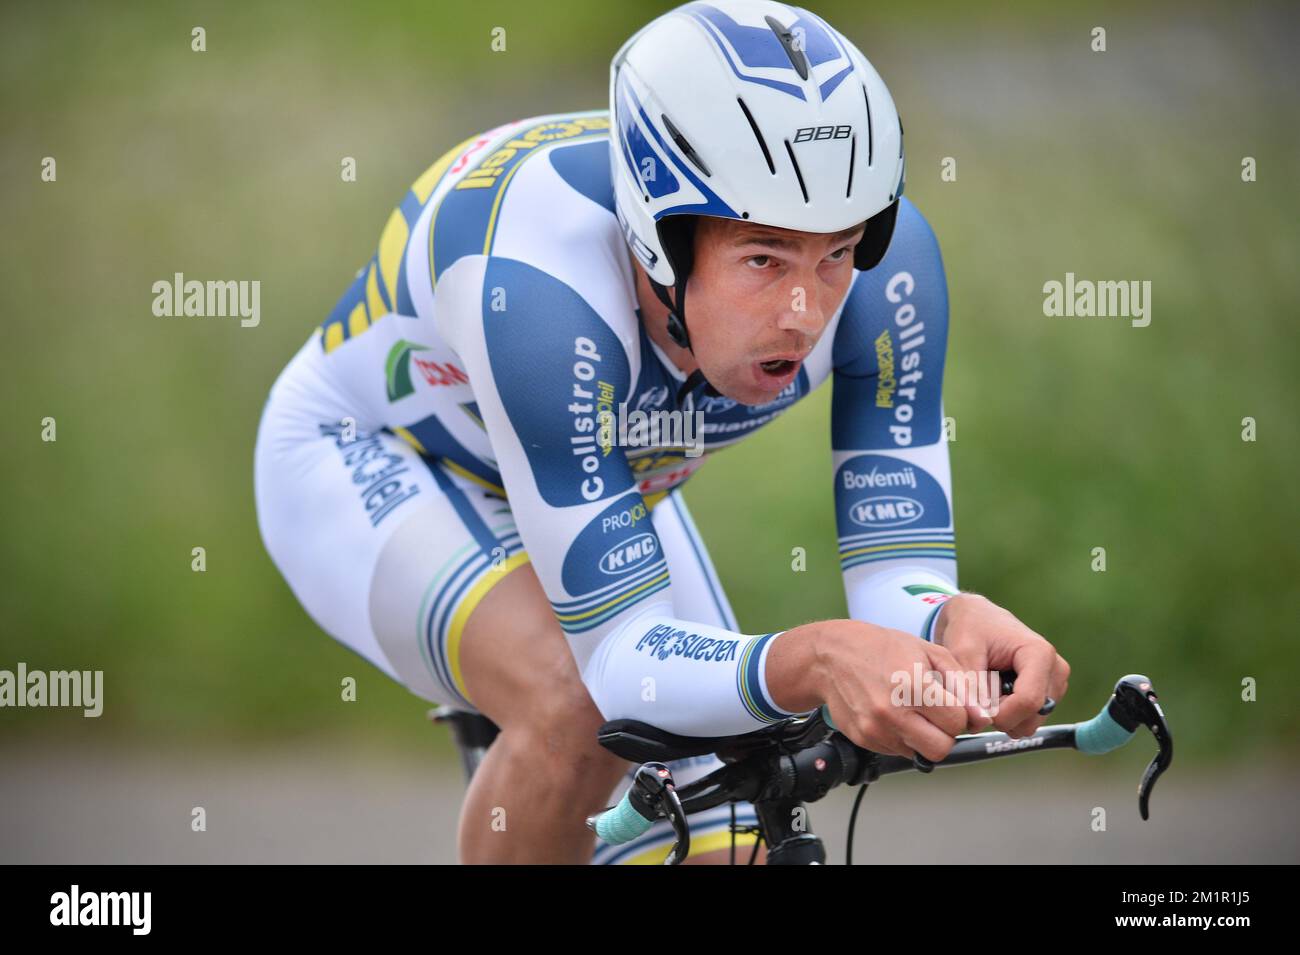 Dutch Kenny van Hummel of team Vacansoleil-DCM in action during the first stage of the Ster ZLM Tour cycling race, a prologue of 8 km in Goes, in the Netherlands, Wednesday 12 June 2013. Ster Zlm is a five days race from 12 to 16 June in The Netherlands.  Stock Photo